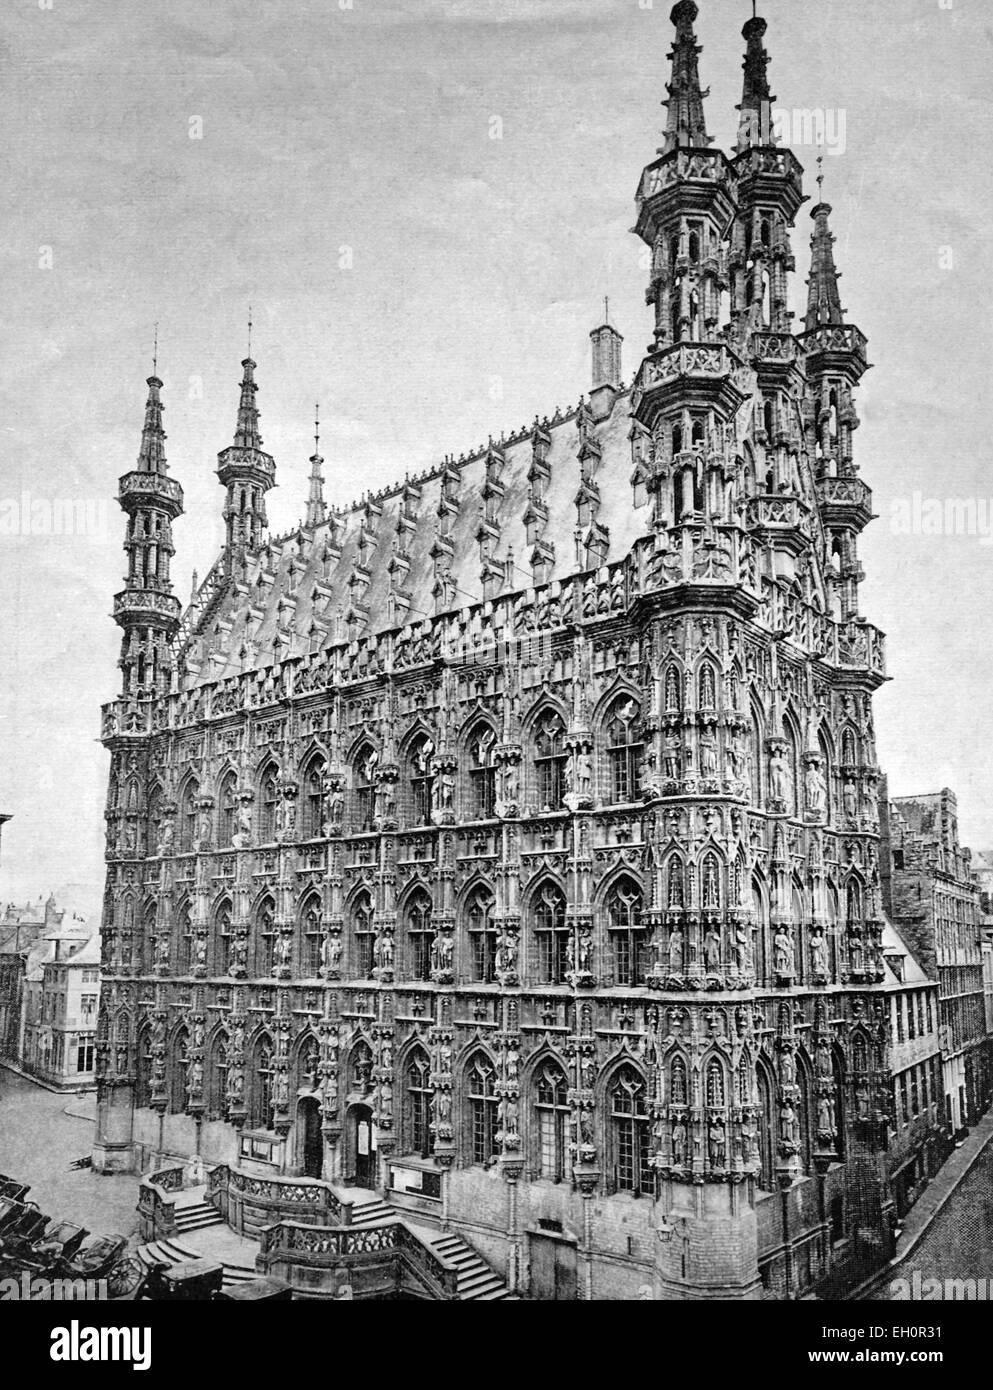 Early autotype of the town hall in Leuven, Leuven, Flemish Brabant, Belgium, historical photograph, 1884 Stock Photo